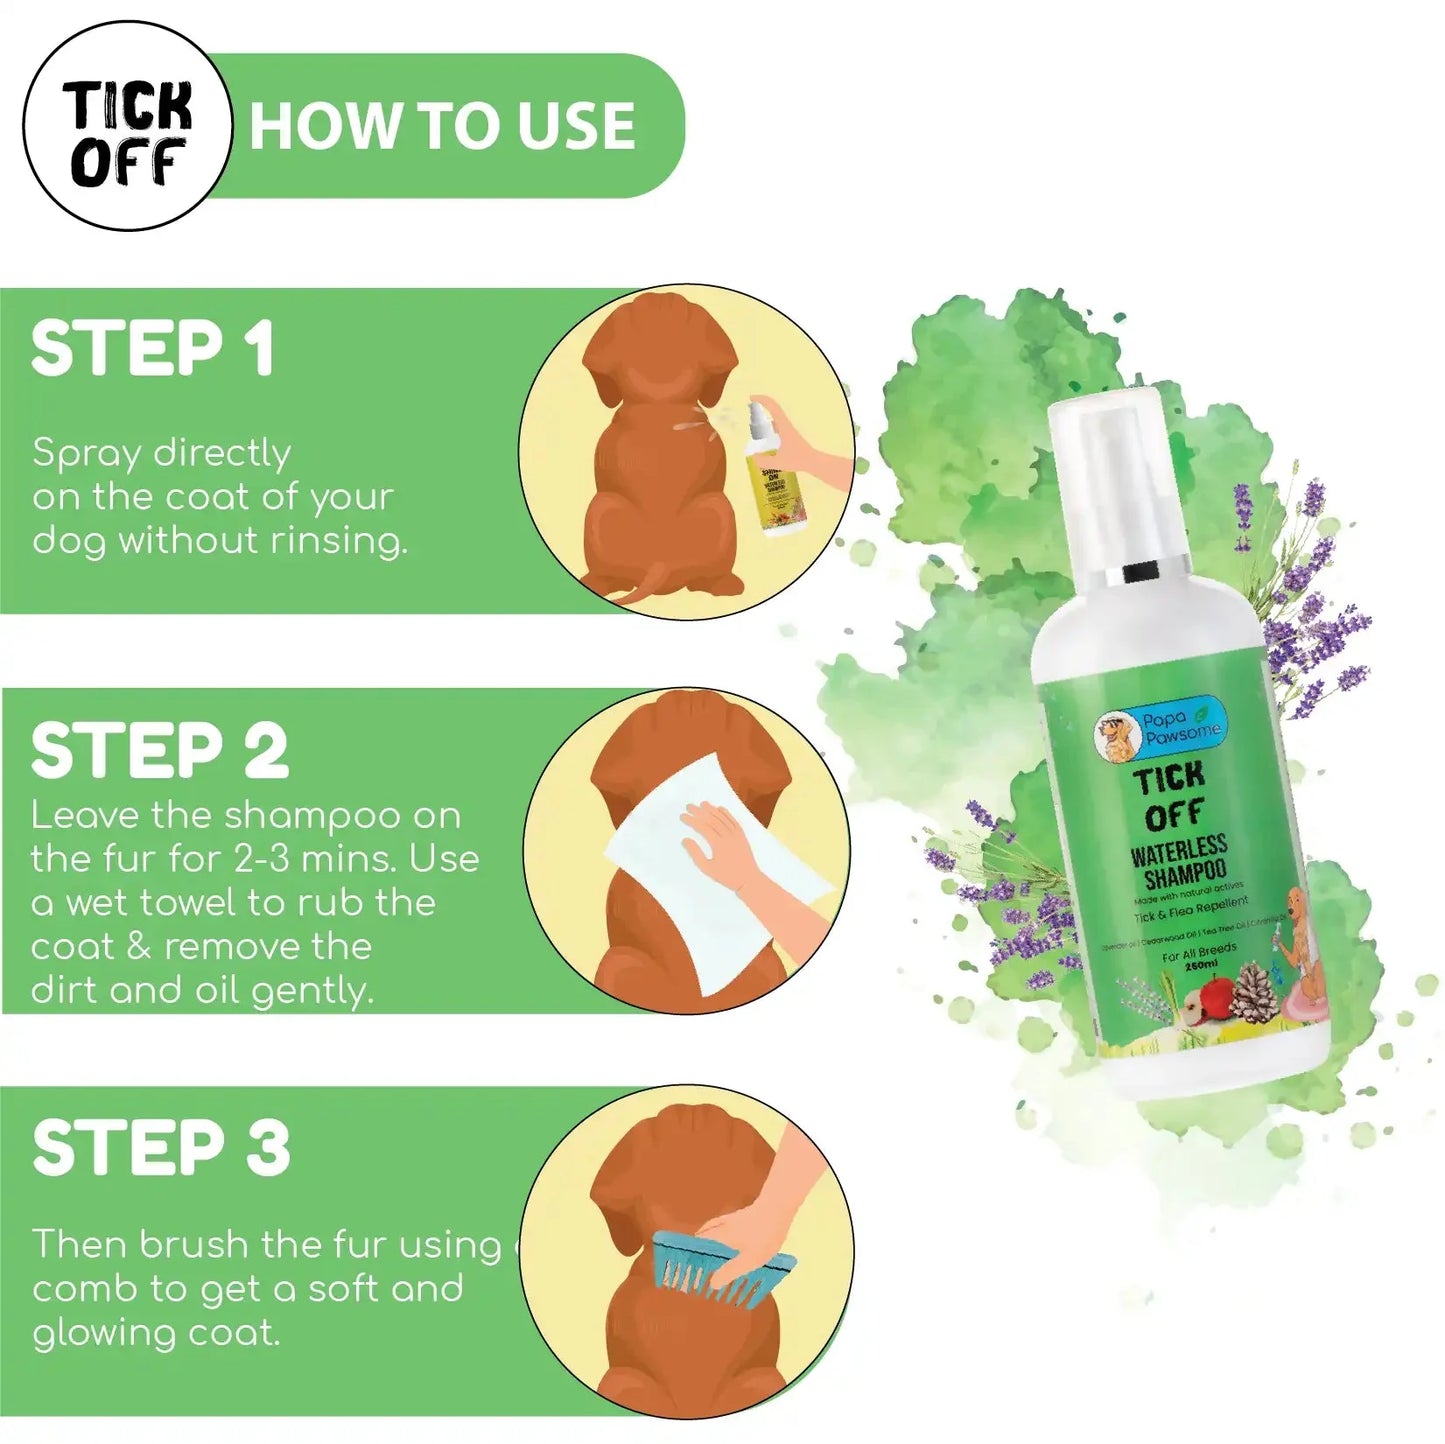 Application instructions for dog waterless shampoo: Spray directly on the coat, leave on for 2-3 minutes, and use a damp towel to remove dirt and oil gently